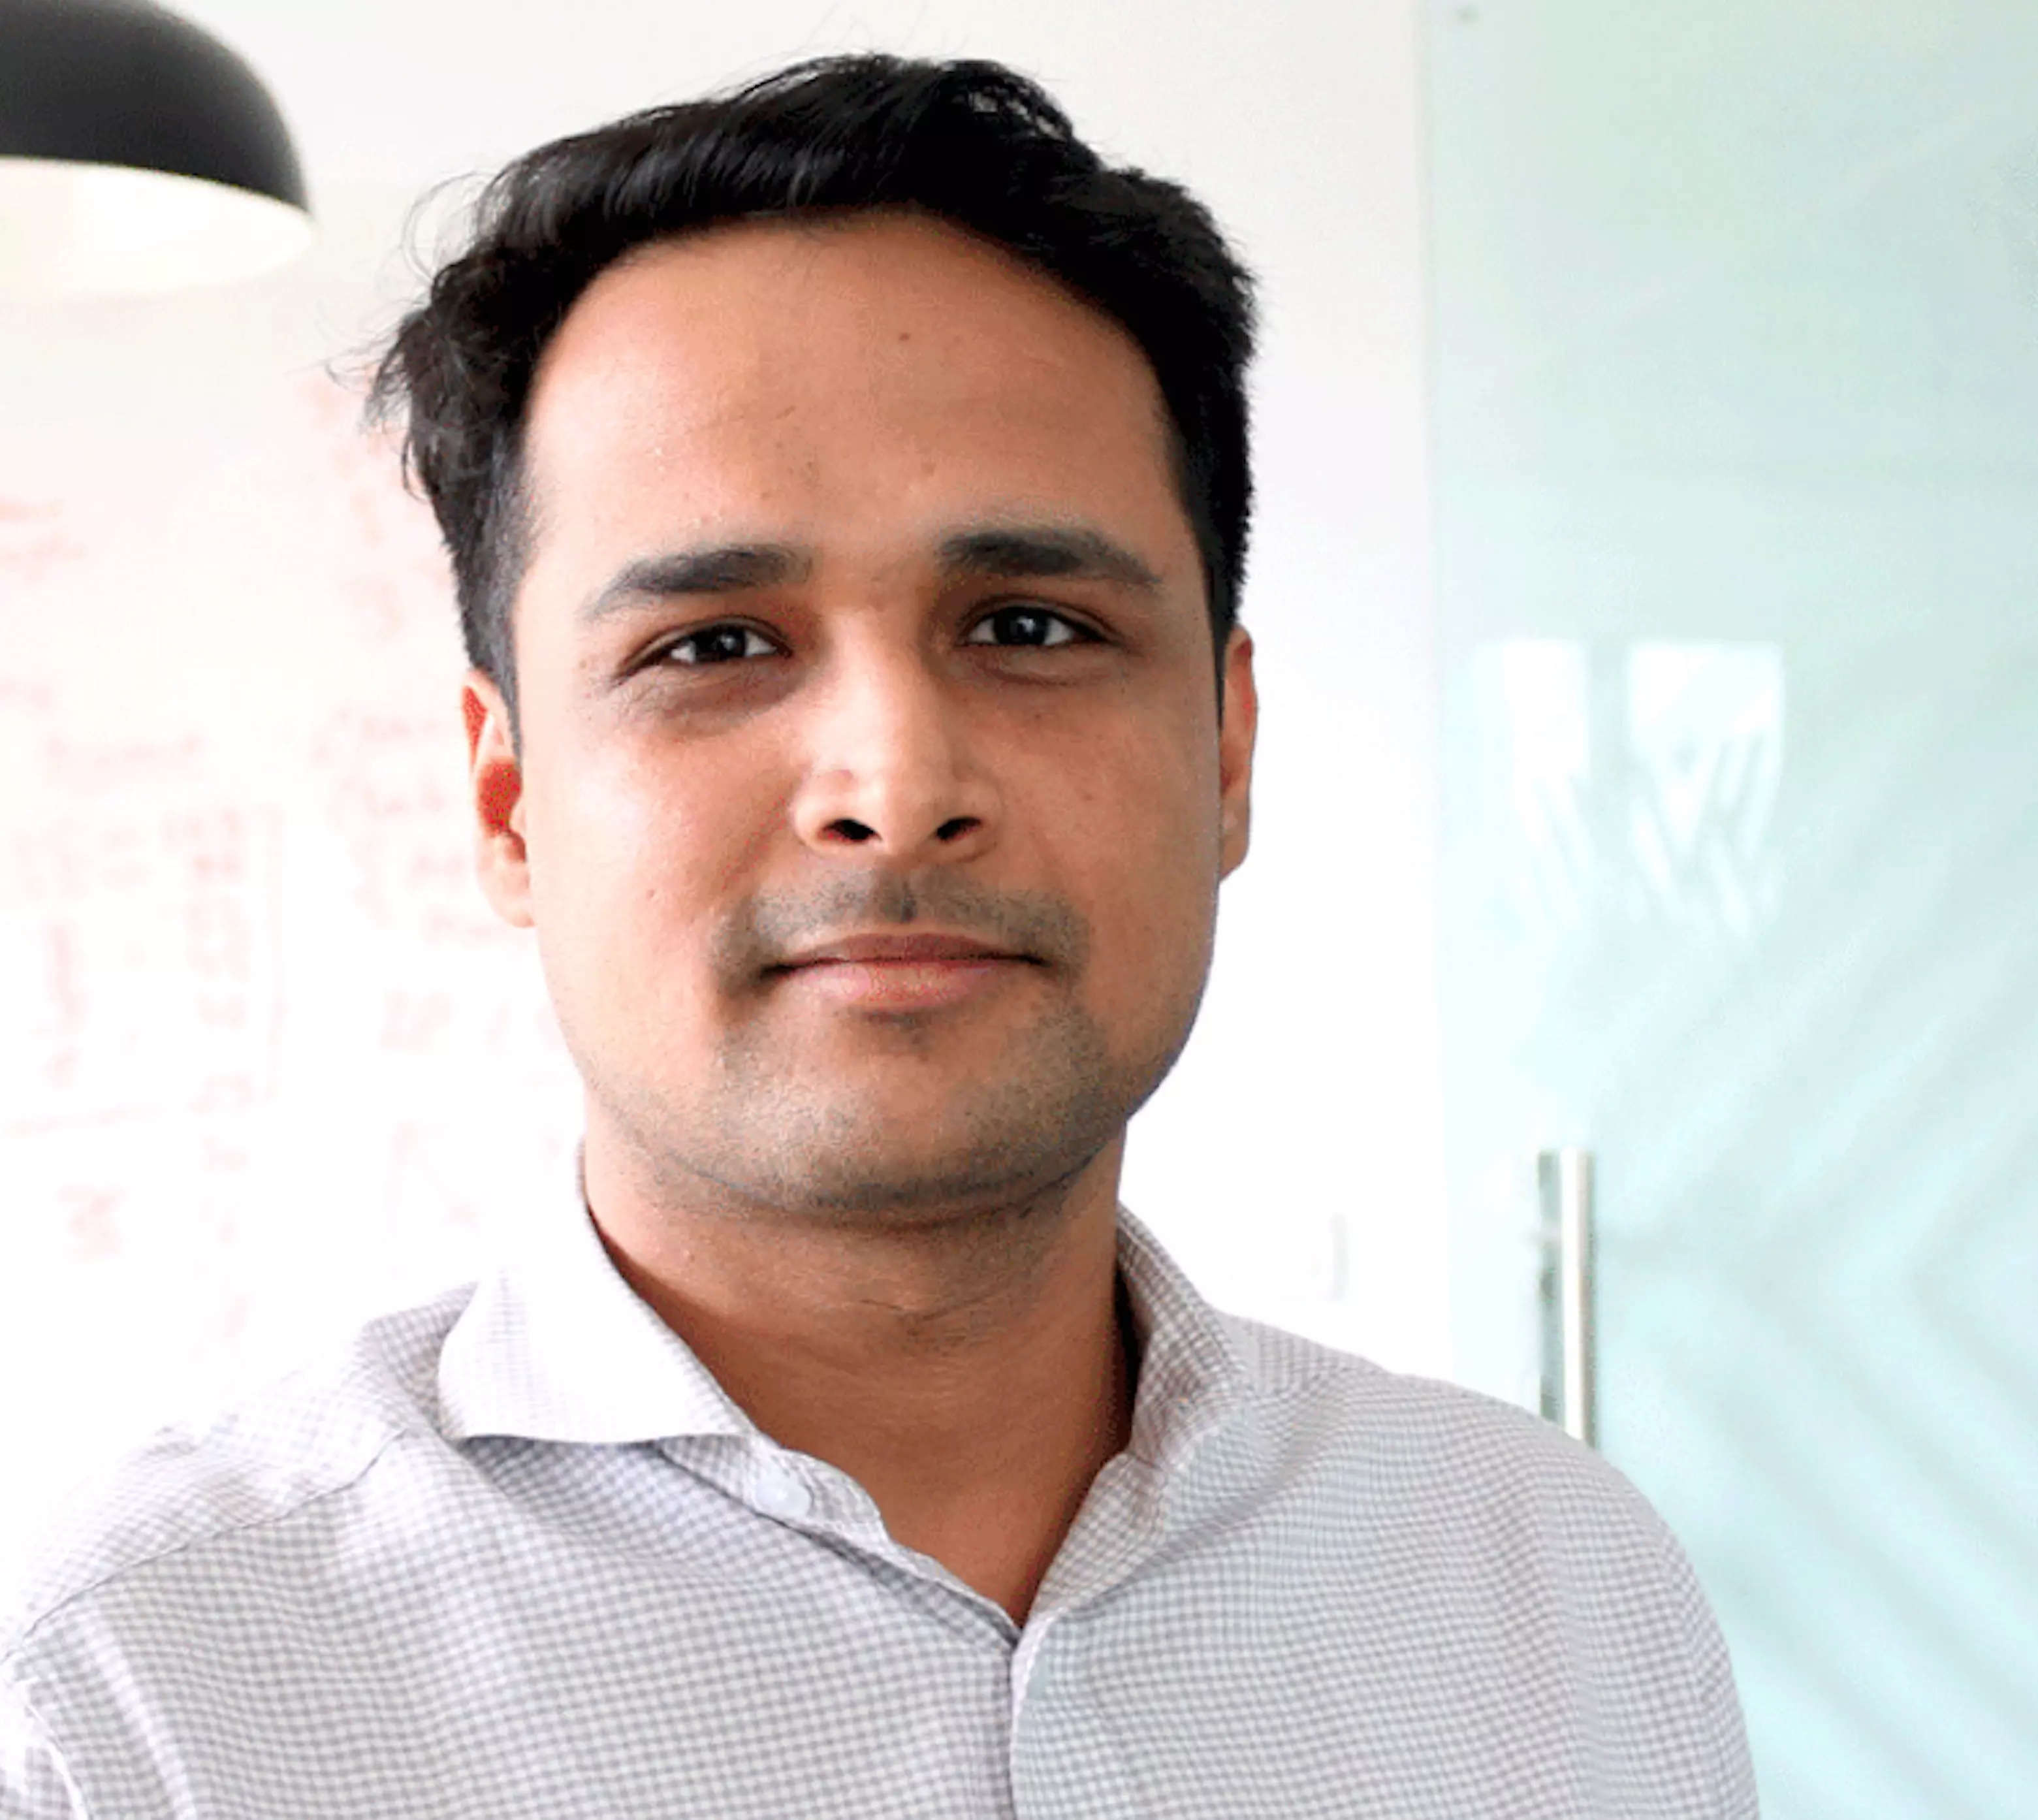 Xperium is majorly helping hotels in two ways post pandemic, firstly bringing new business using old data and secondly increasing revenue from existing guests, says its founder, Pranjal Prashar. 